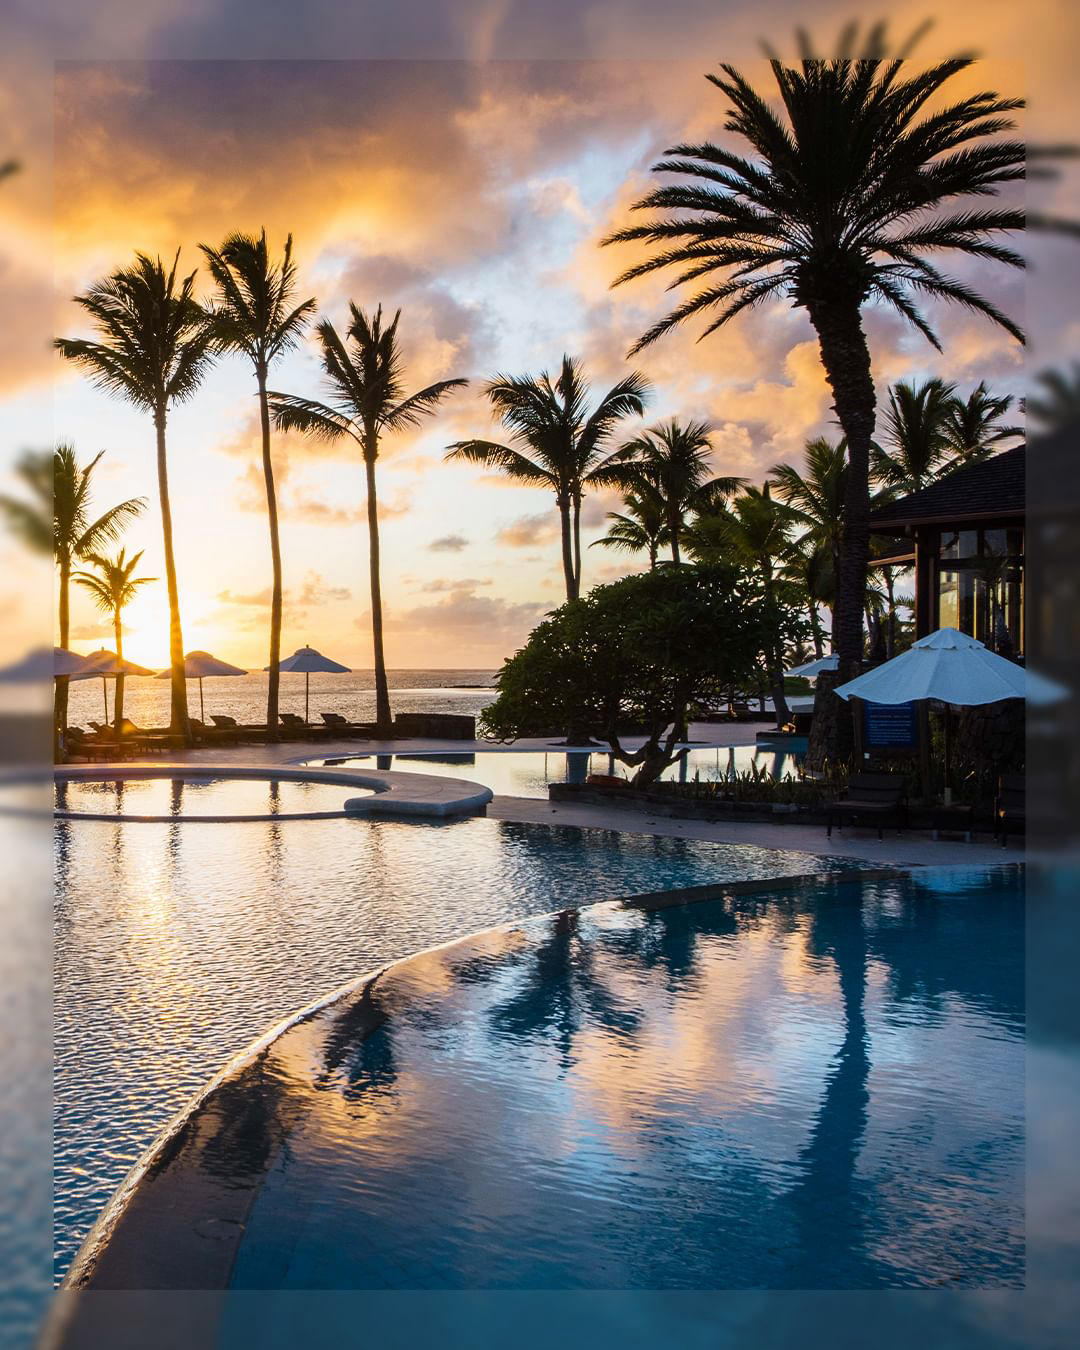 The Residence Mauritius - Sunrise at the Residence Mauritius, the best way to start your day